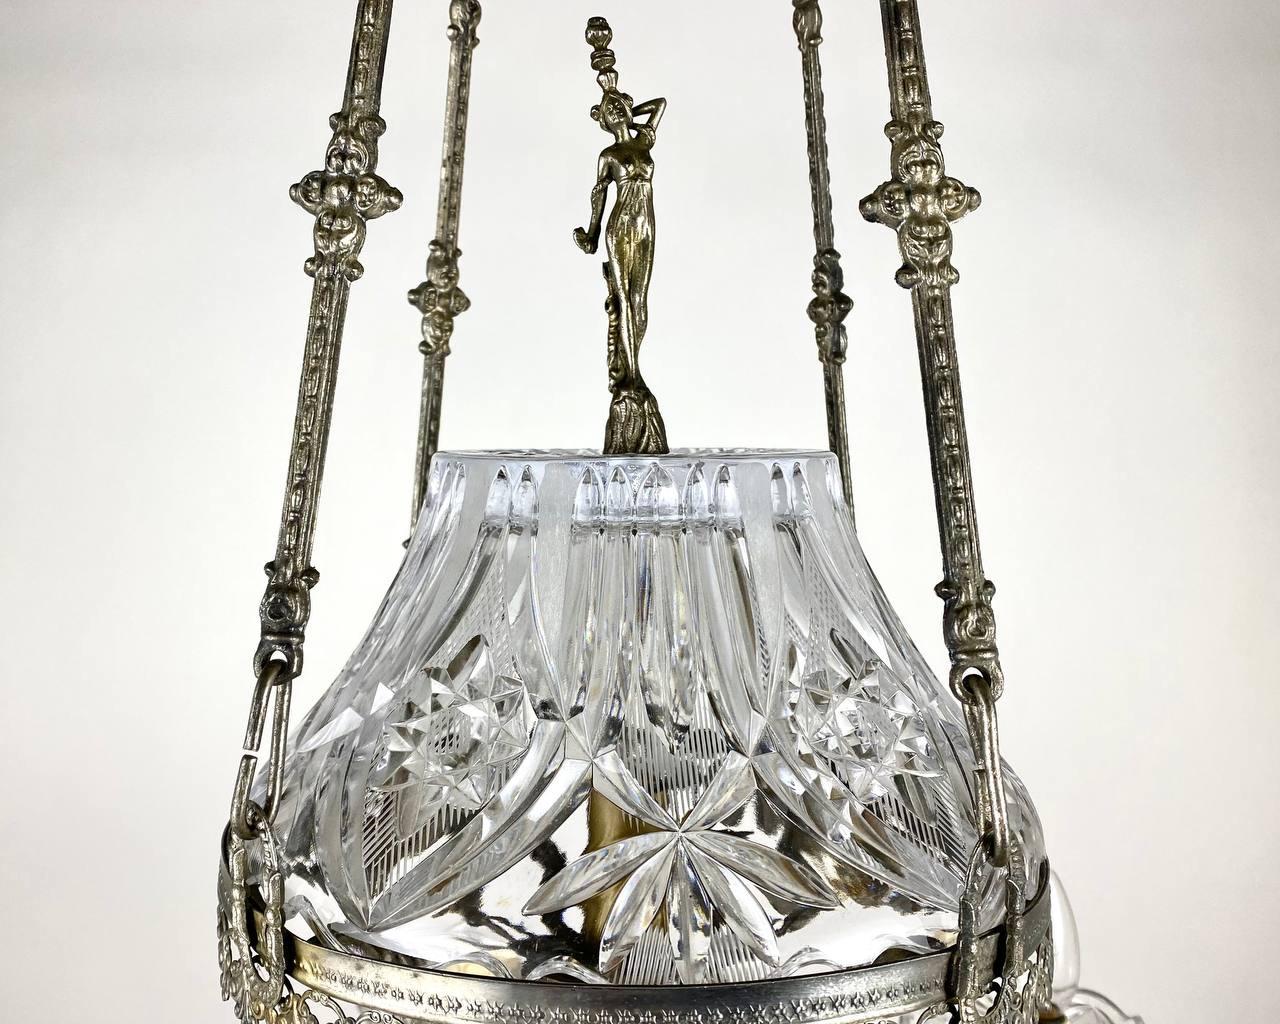 Large lead crystal and brass chandelier with 6 horns.
France, 1950s.
Made of high-quality crystal with a lead content of over 30% (these indicators characterize modern Swarovski crystals).
The body of the chandelier is made of hand forged and